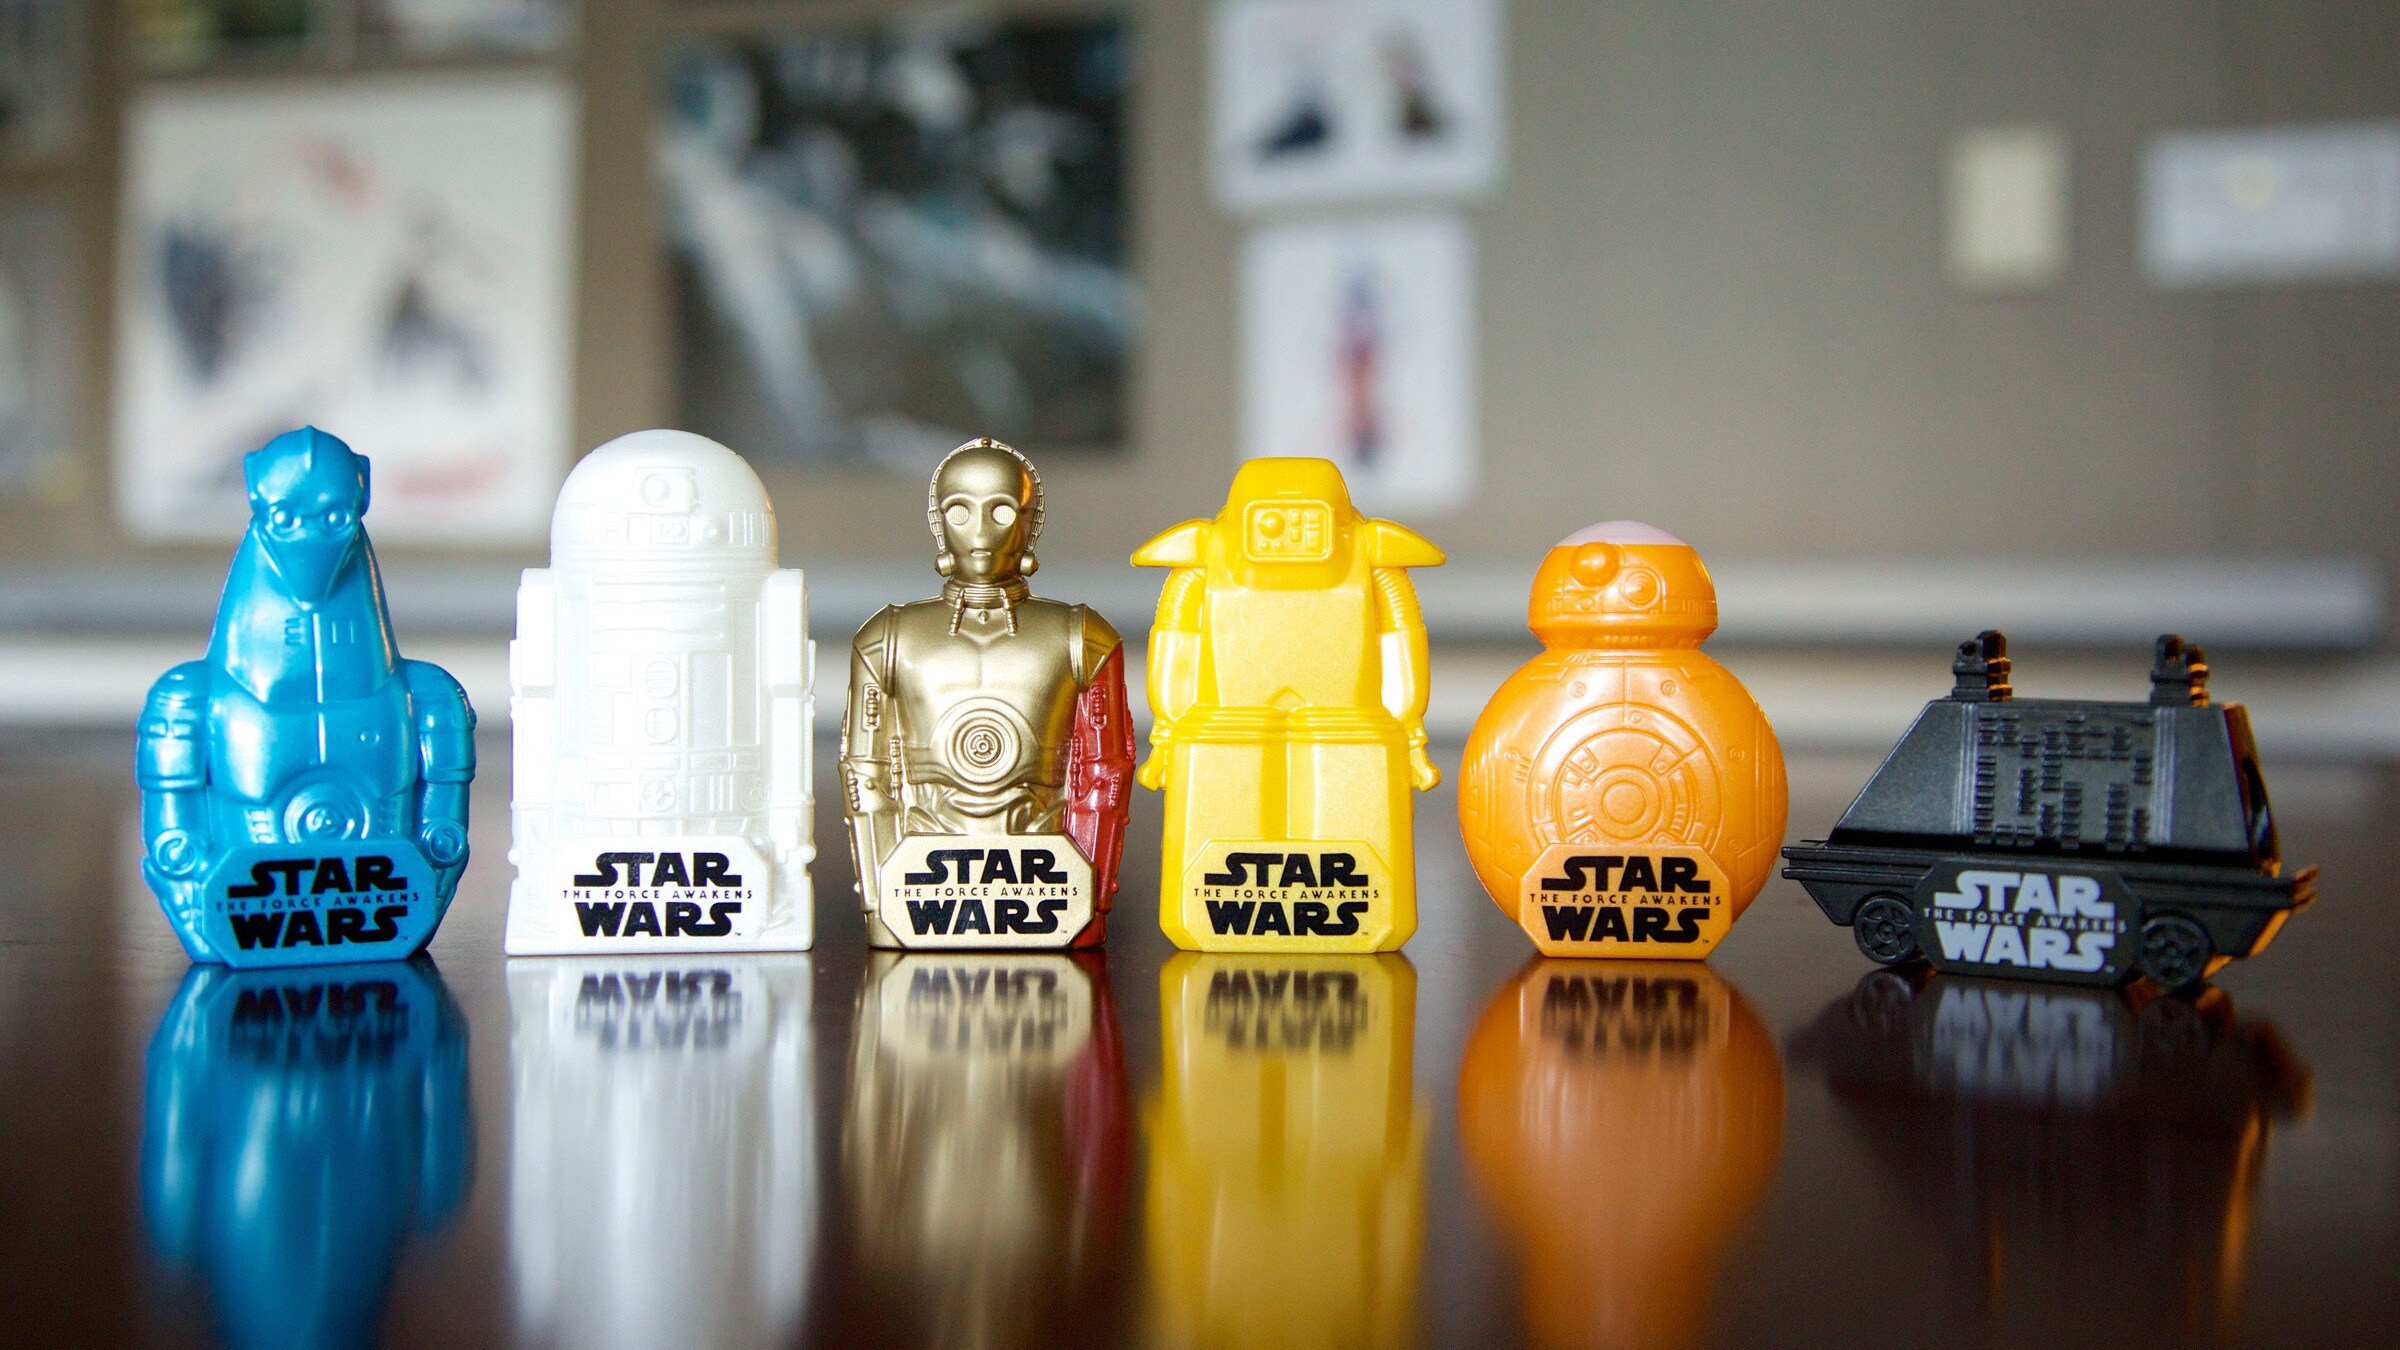 General Mills Cereals Have the Droids You're Looking For